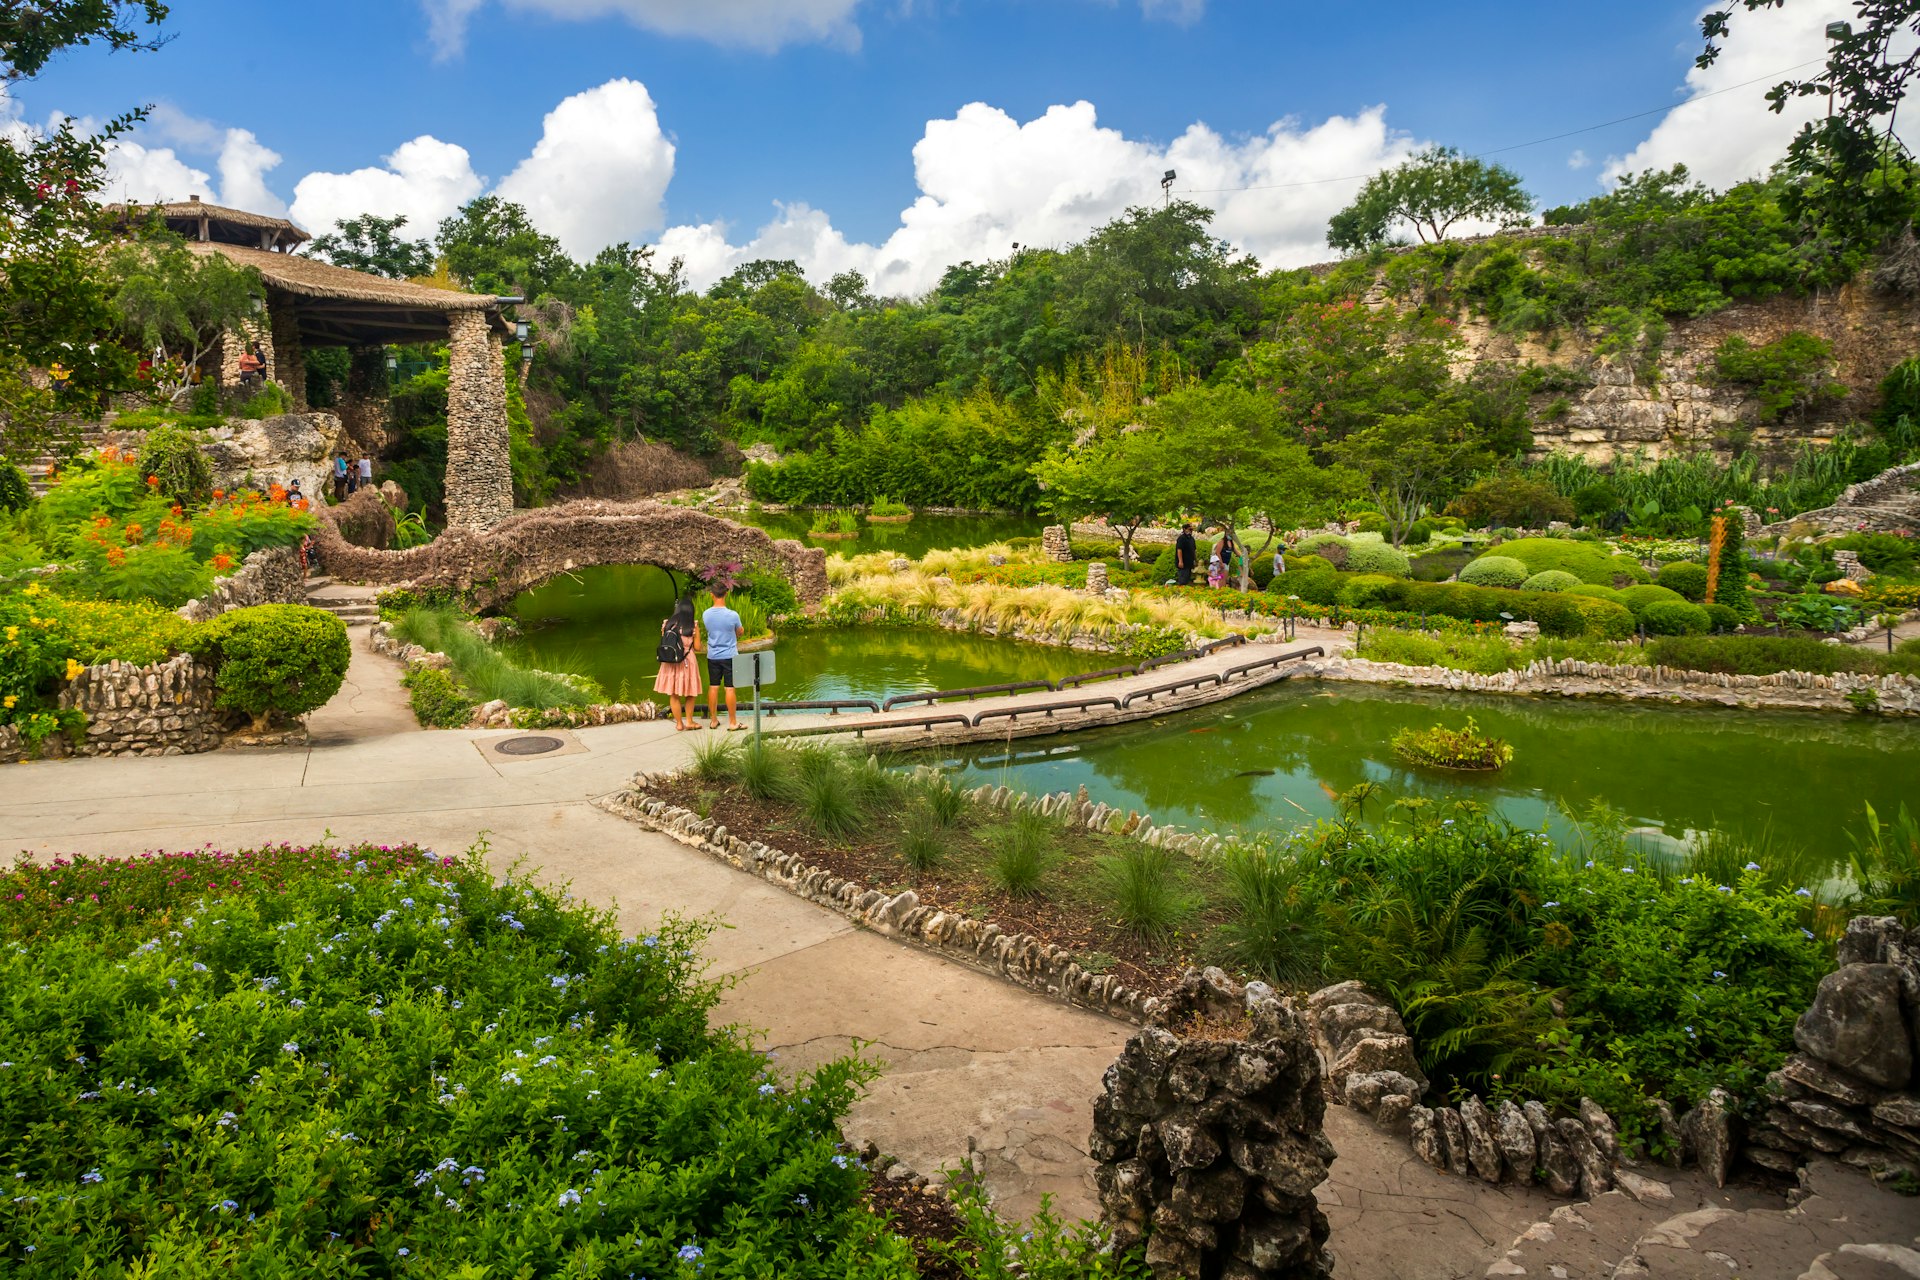 Two people stand on the edge of a series of ponds in a tranquil garden full of greenery